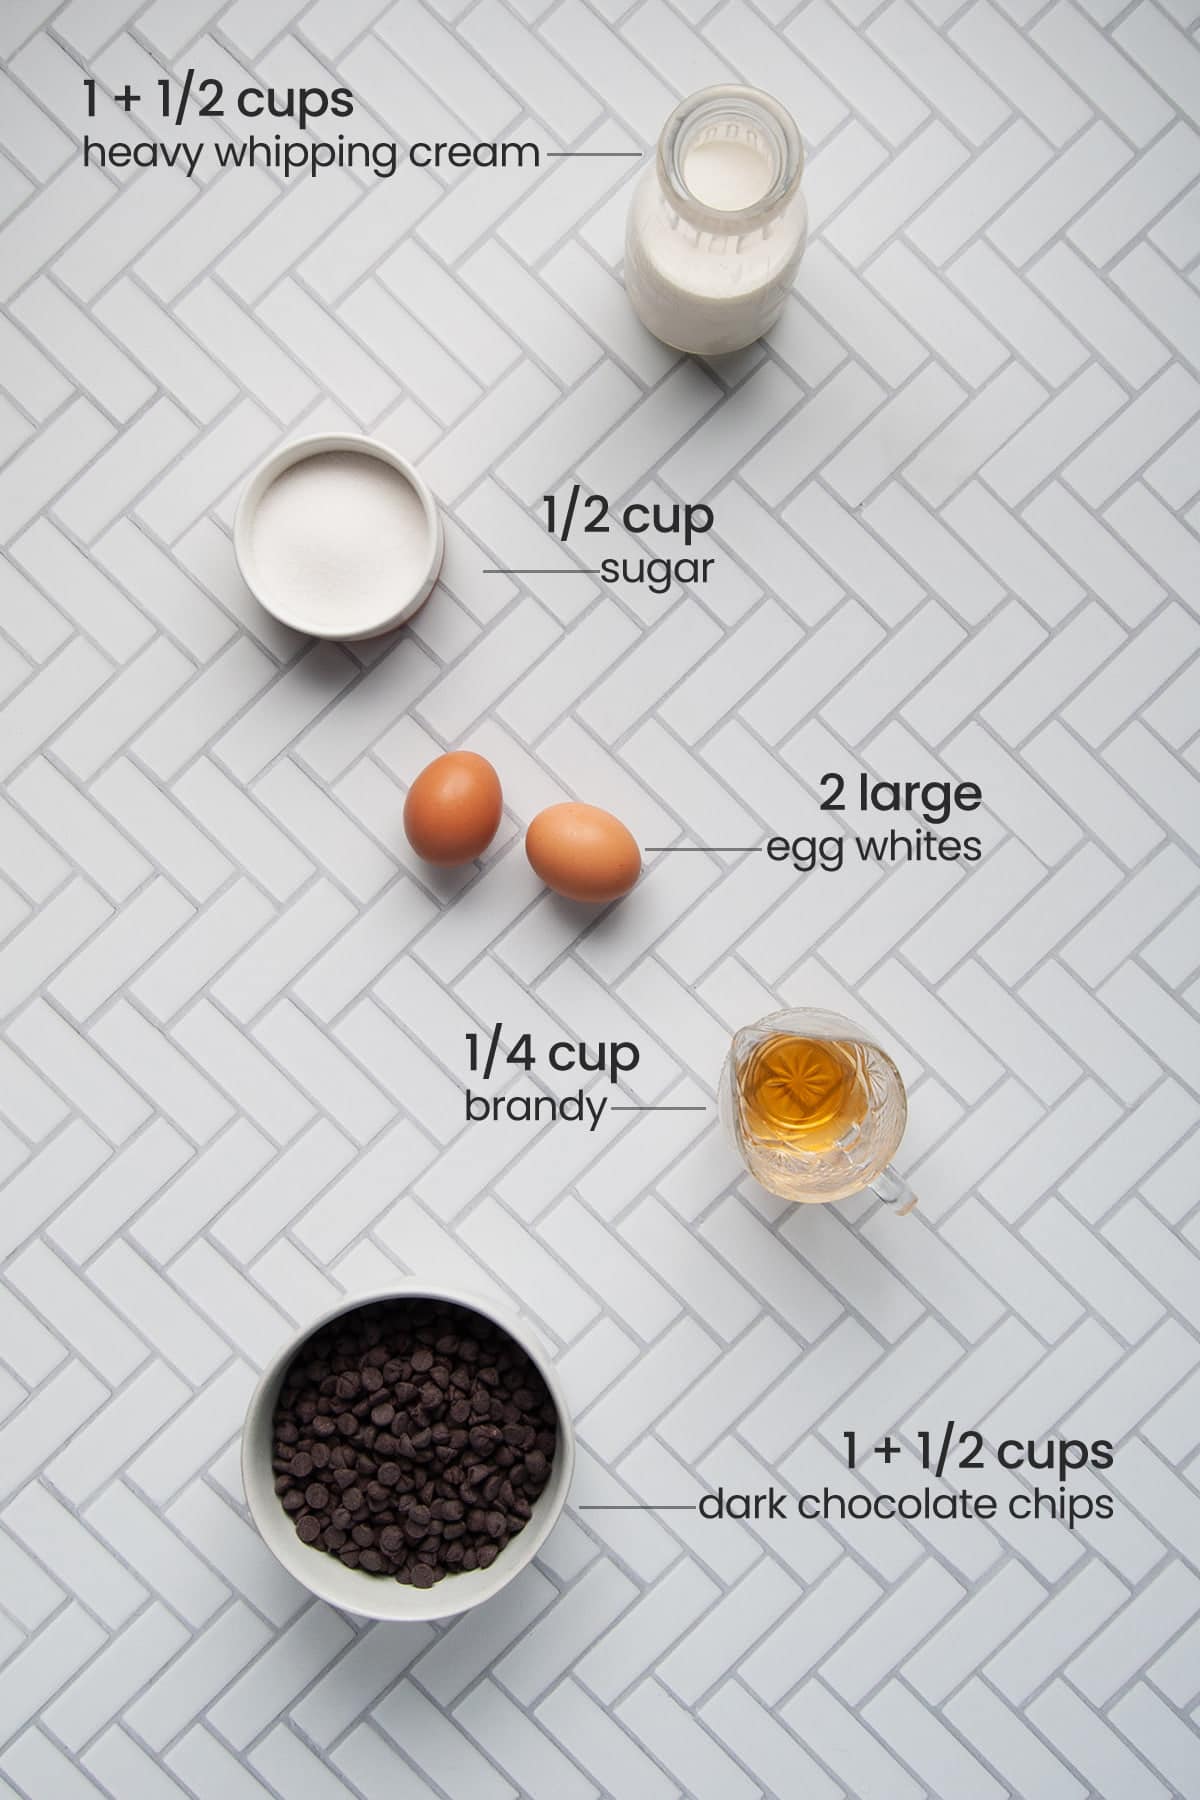 ingredients for boozy chocolate mousse - heavy whipping cream, sugar, egg whites, brandy, dark chocolate chips